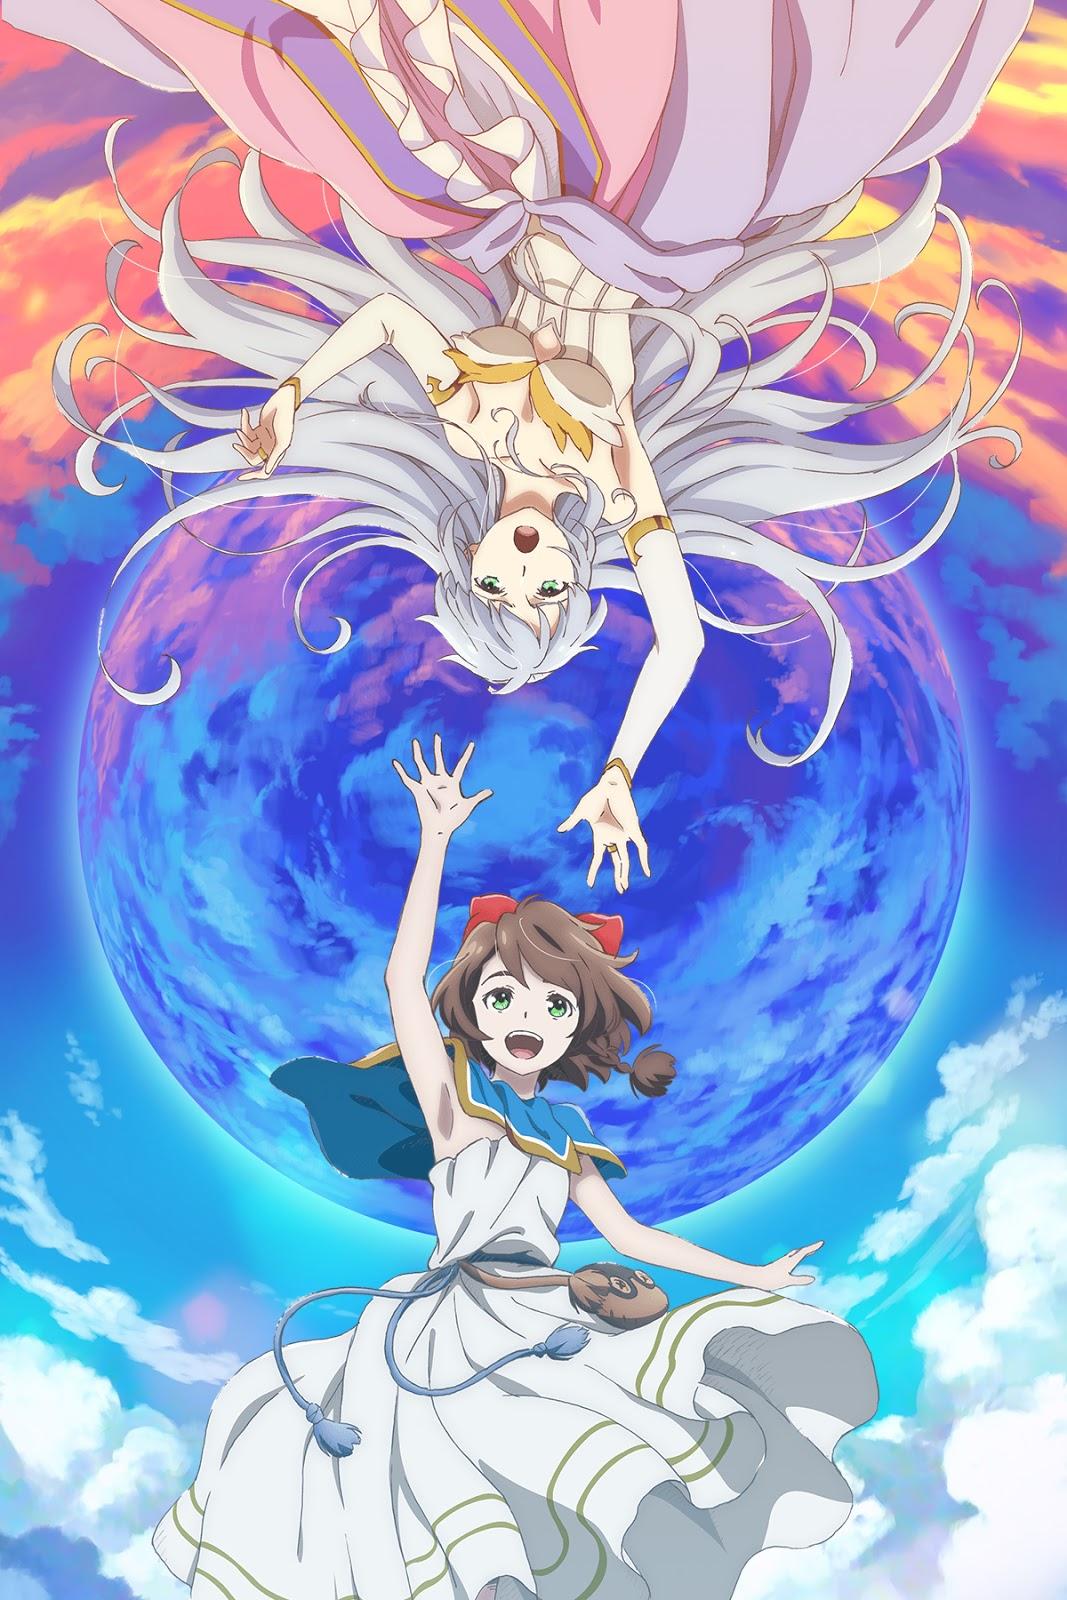 Lost Song Wallpaper High Quality